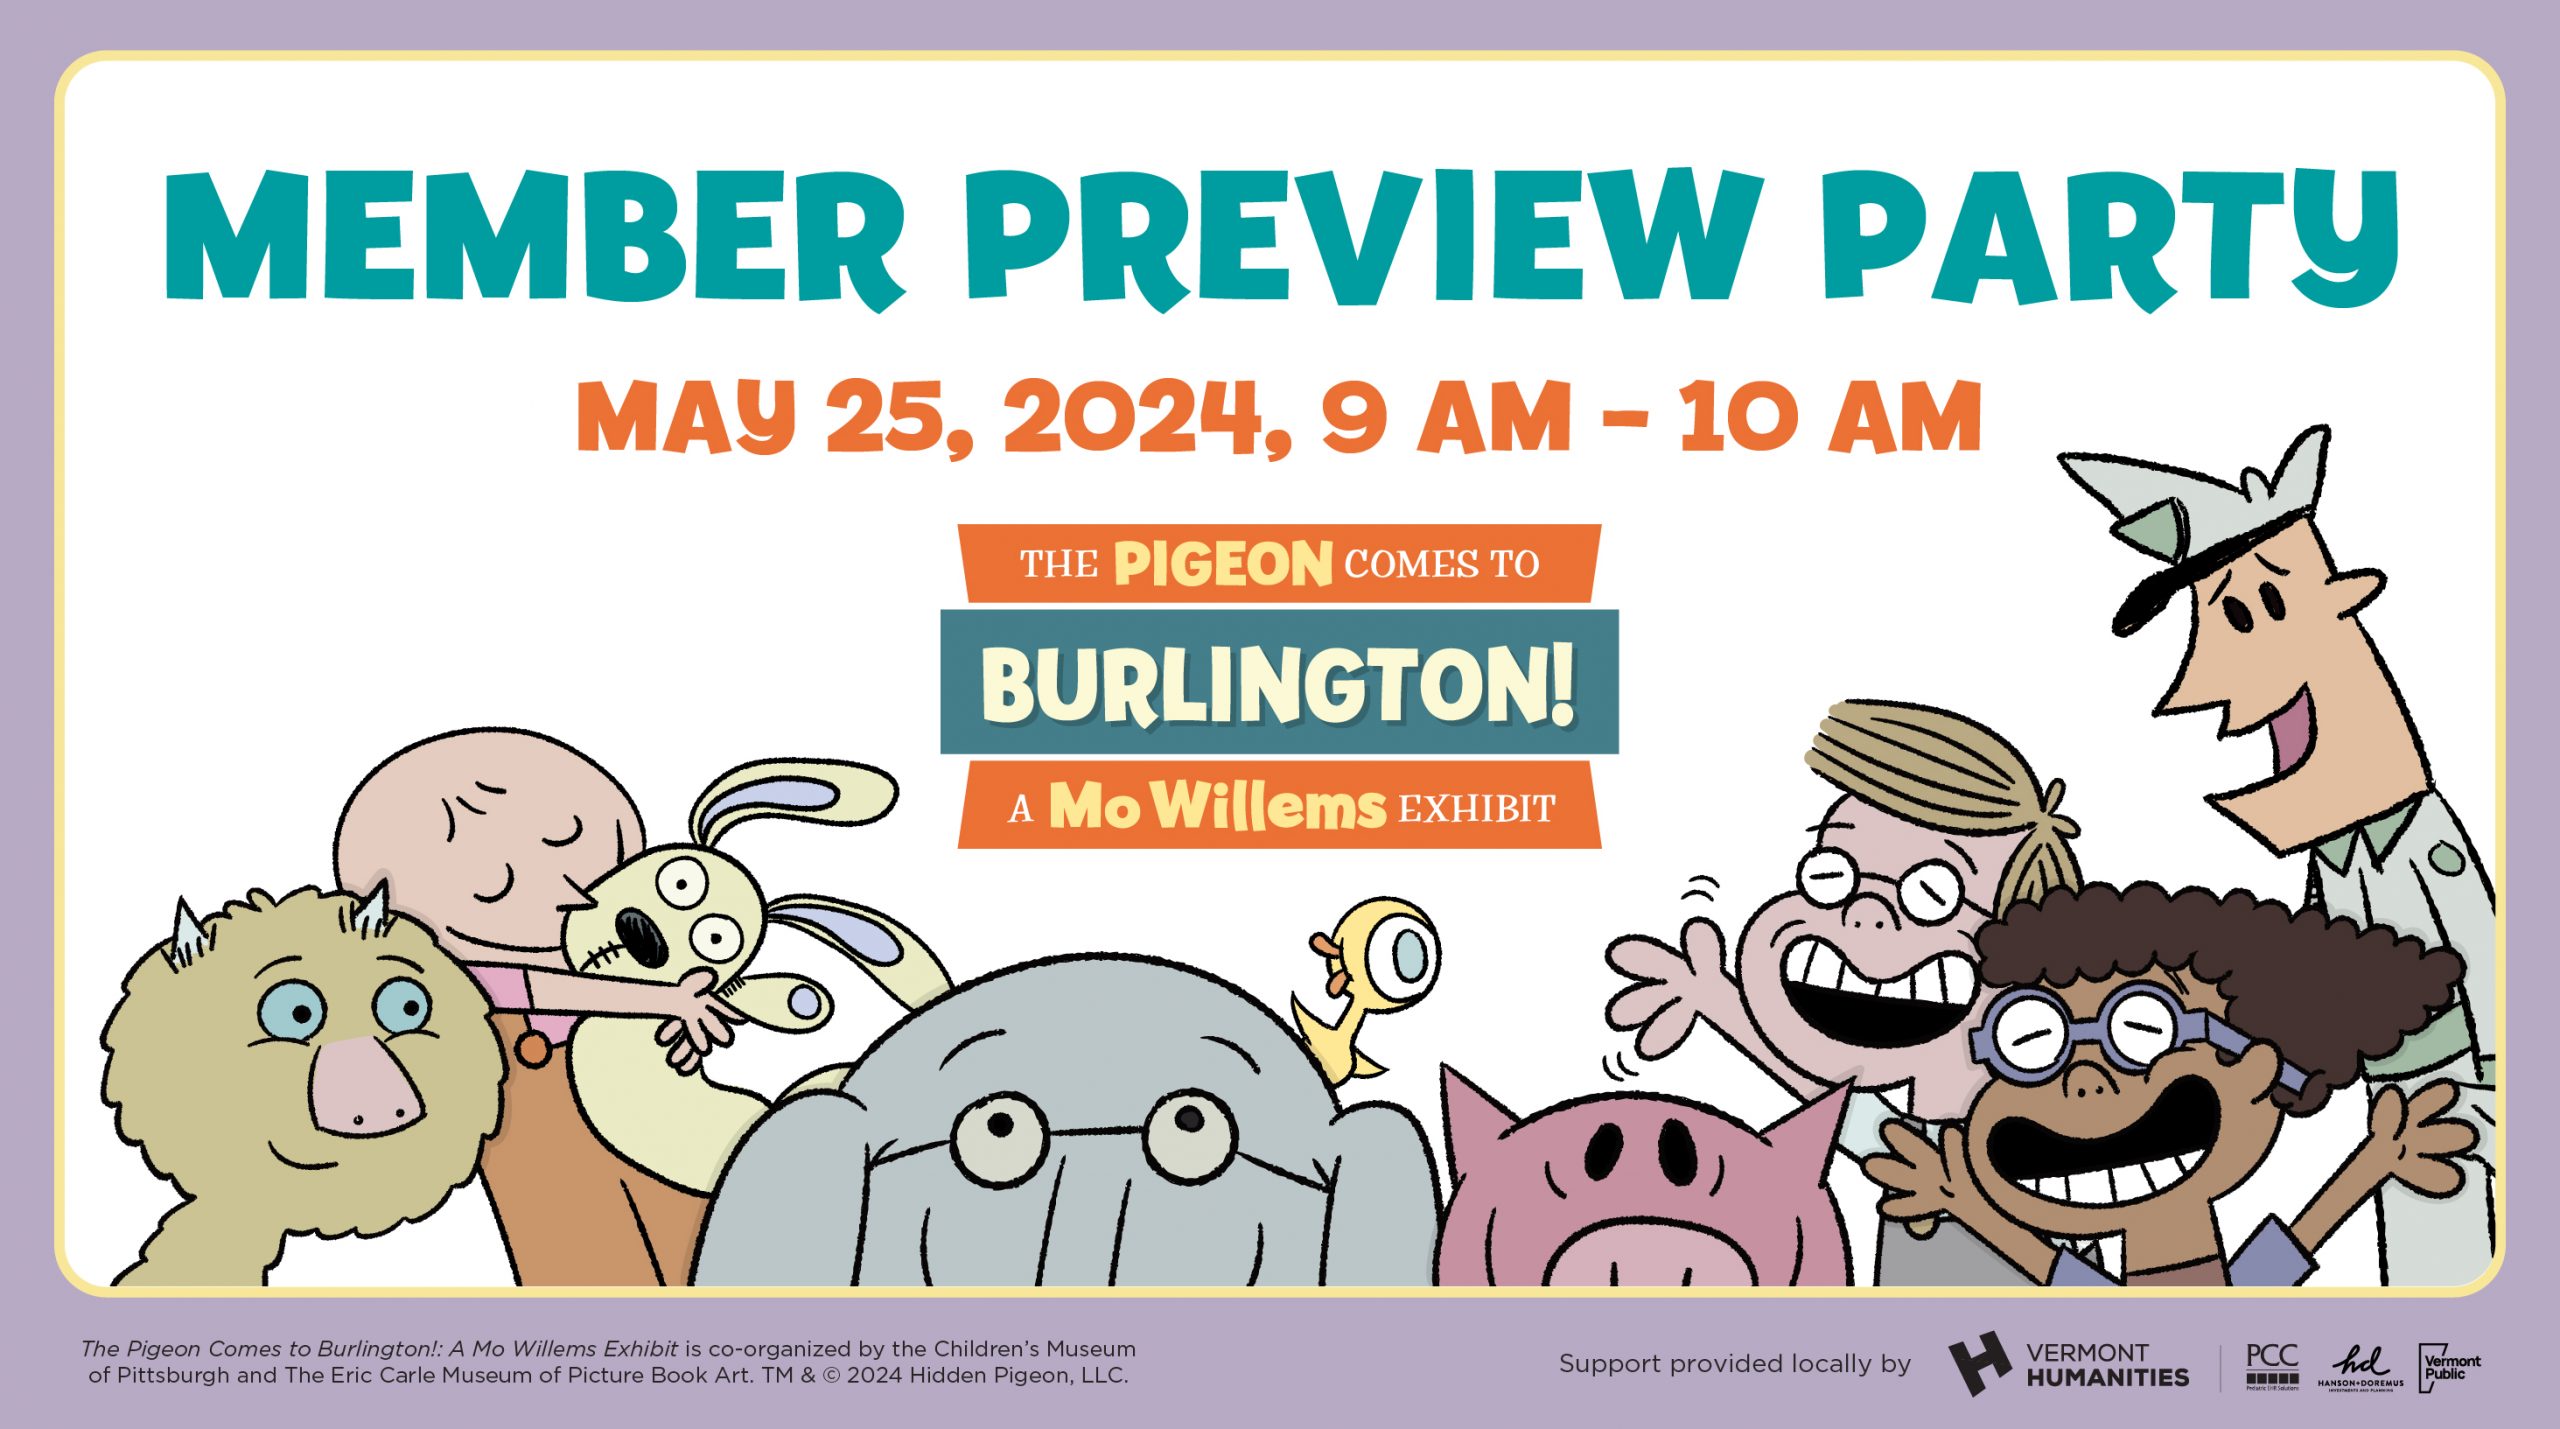 Illustration of a group of Mo Willems children's book characters. Text reads "MEMBER PREVIEW PARTY MAY 25, 2024, 9 am - 10 am." Logo for The Pigeon Comes to Burlington! A Mo Willems Exhibit.